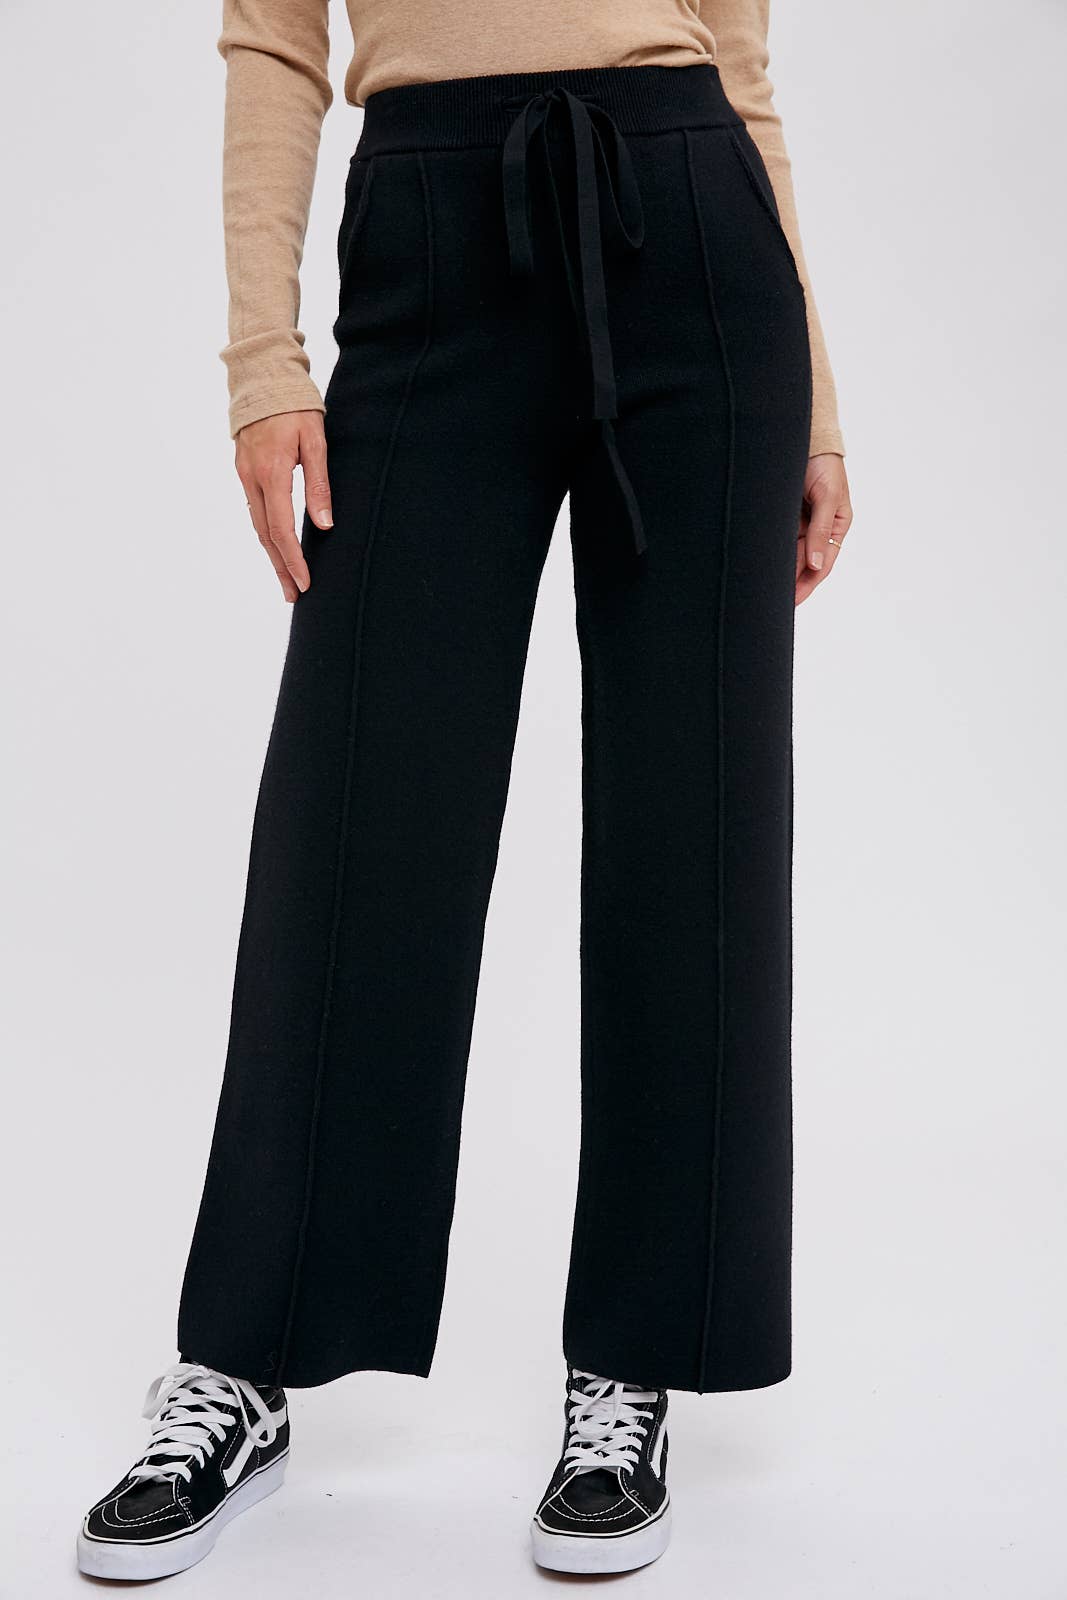 Willow & Root High Waisted Split Flare Pant - Women's Pants in Biscotti  Argan | Buckle